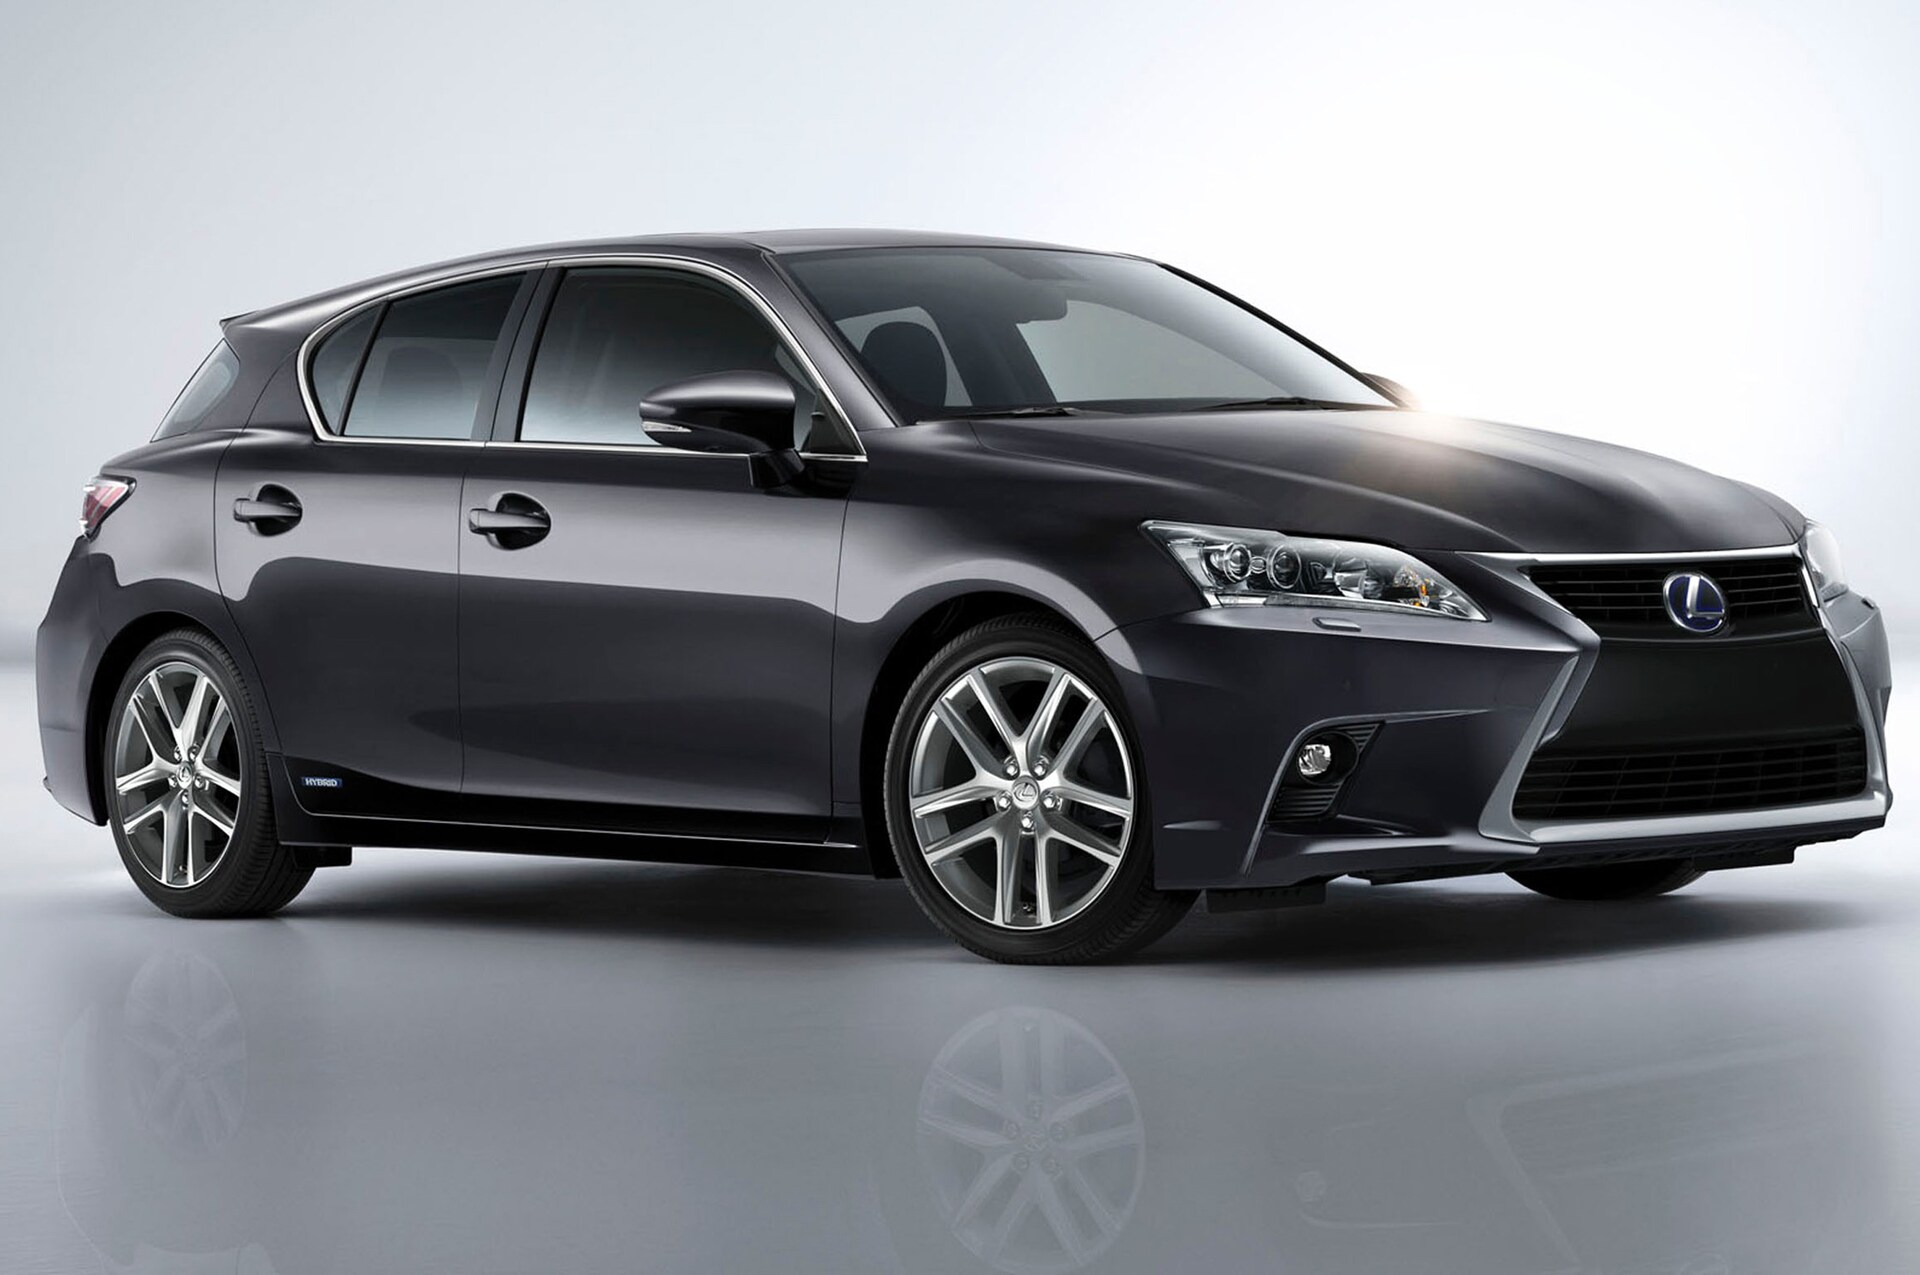 Refreshed 2014 Lexus CT 200h Priced at $32,960